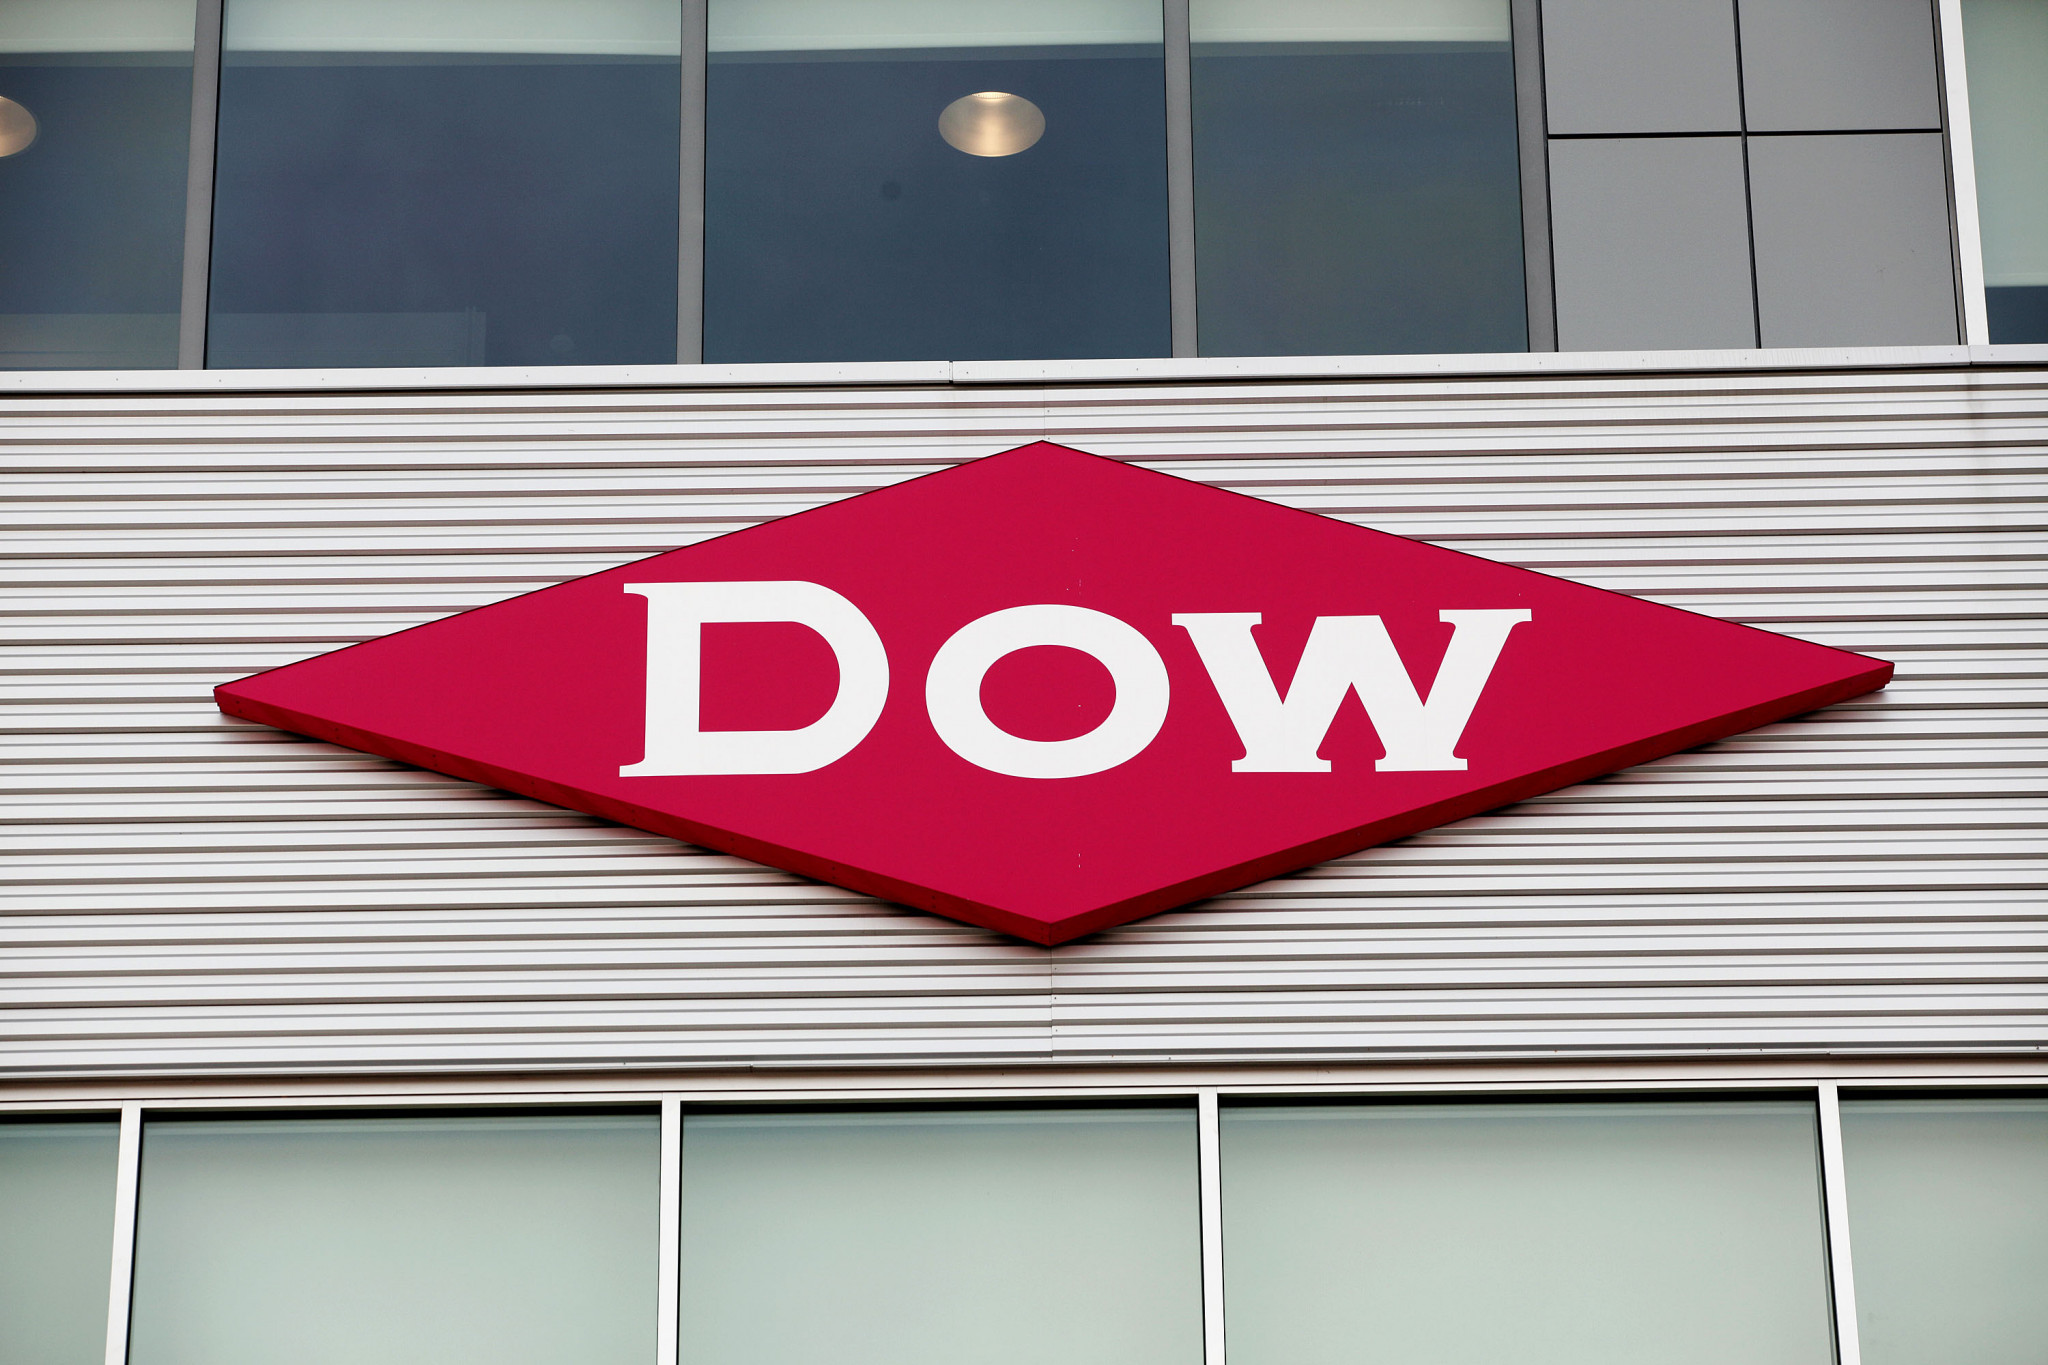 Materials science company Dow has been a member of the IOC's worldwide sponsors programme since 2010 ©Getty Images